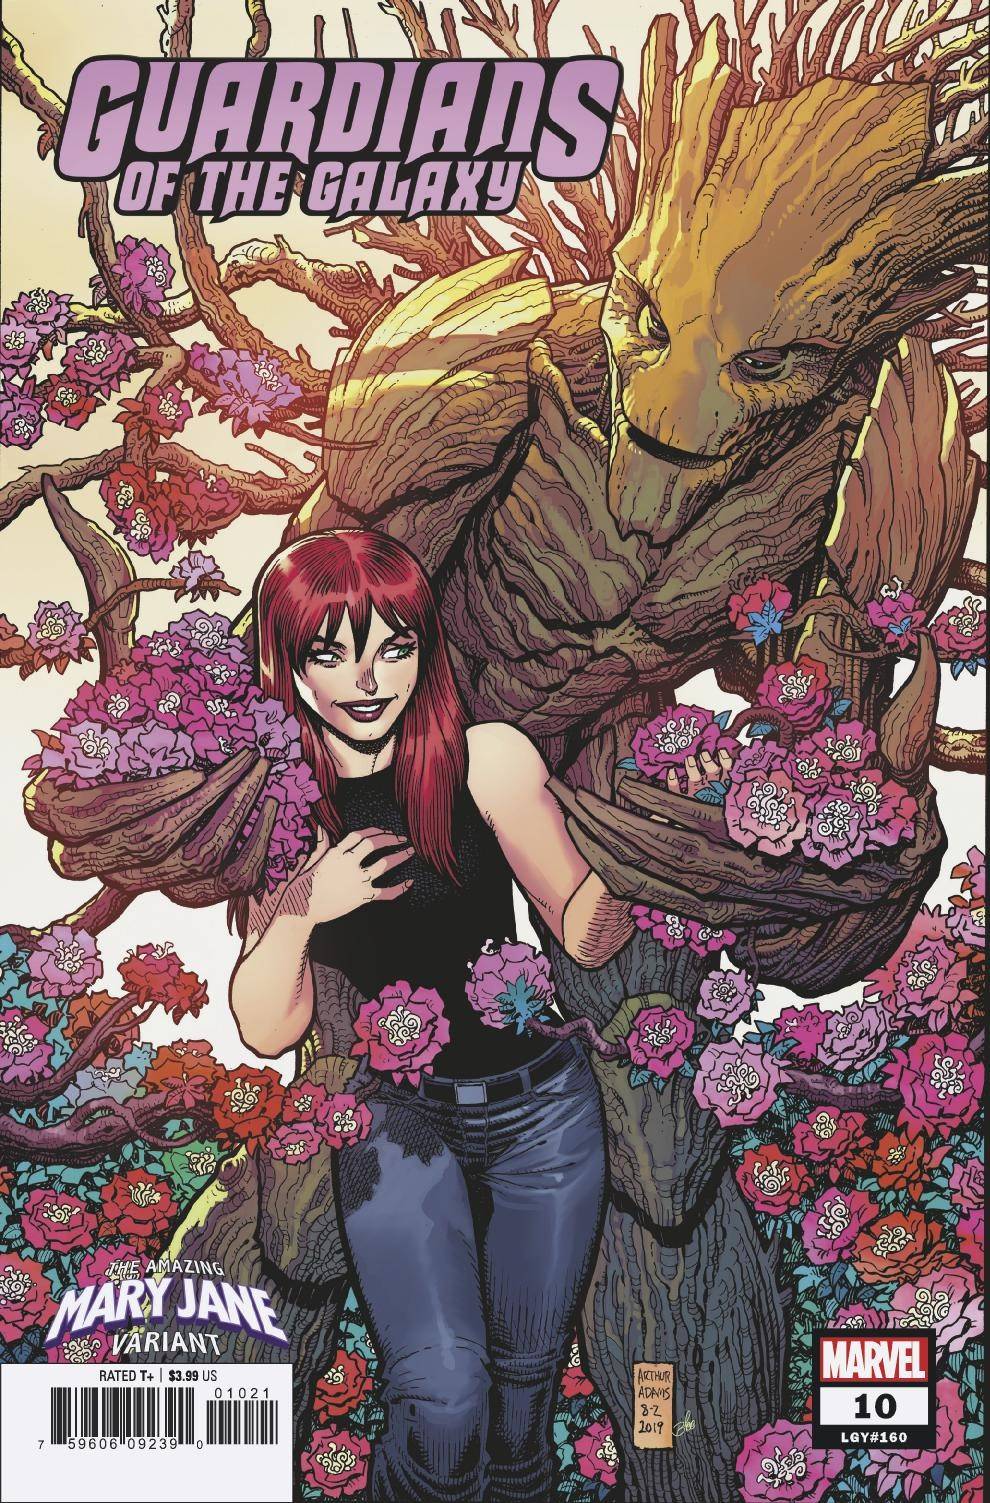 GUARDIANS OF THE GALAXY #10 ADAMS MARY JANE VARIANT 10/16/19 FOC 09/23/19